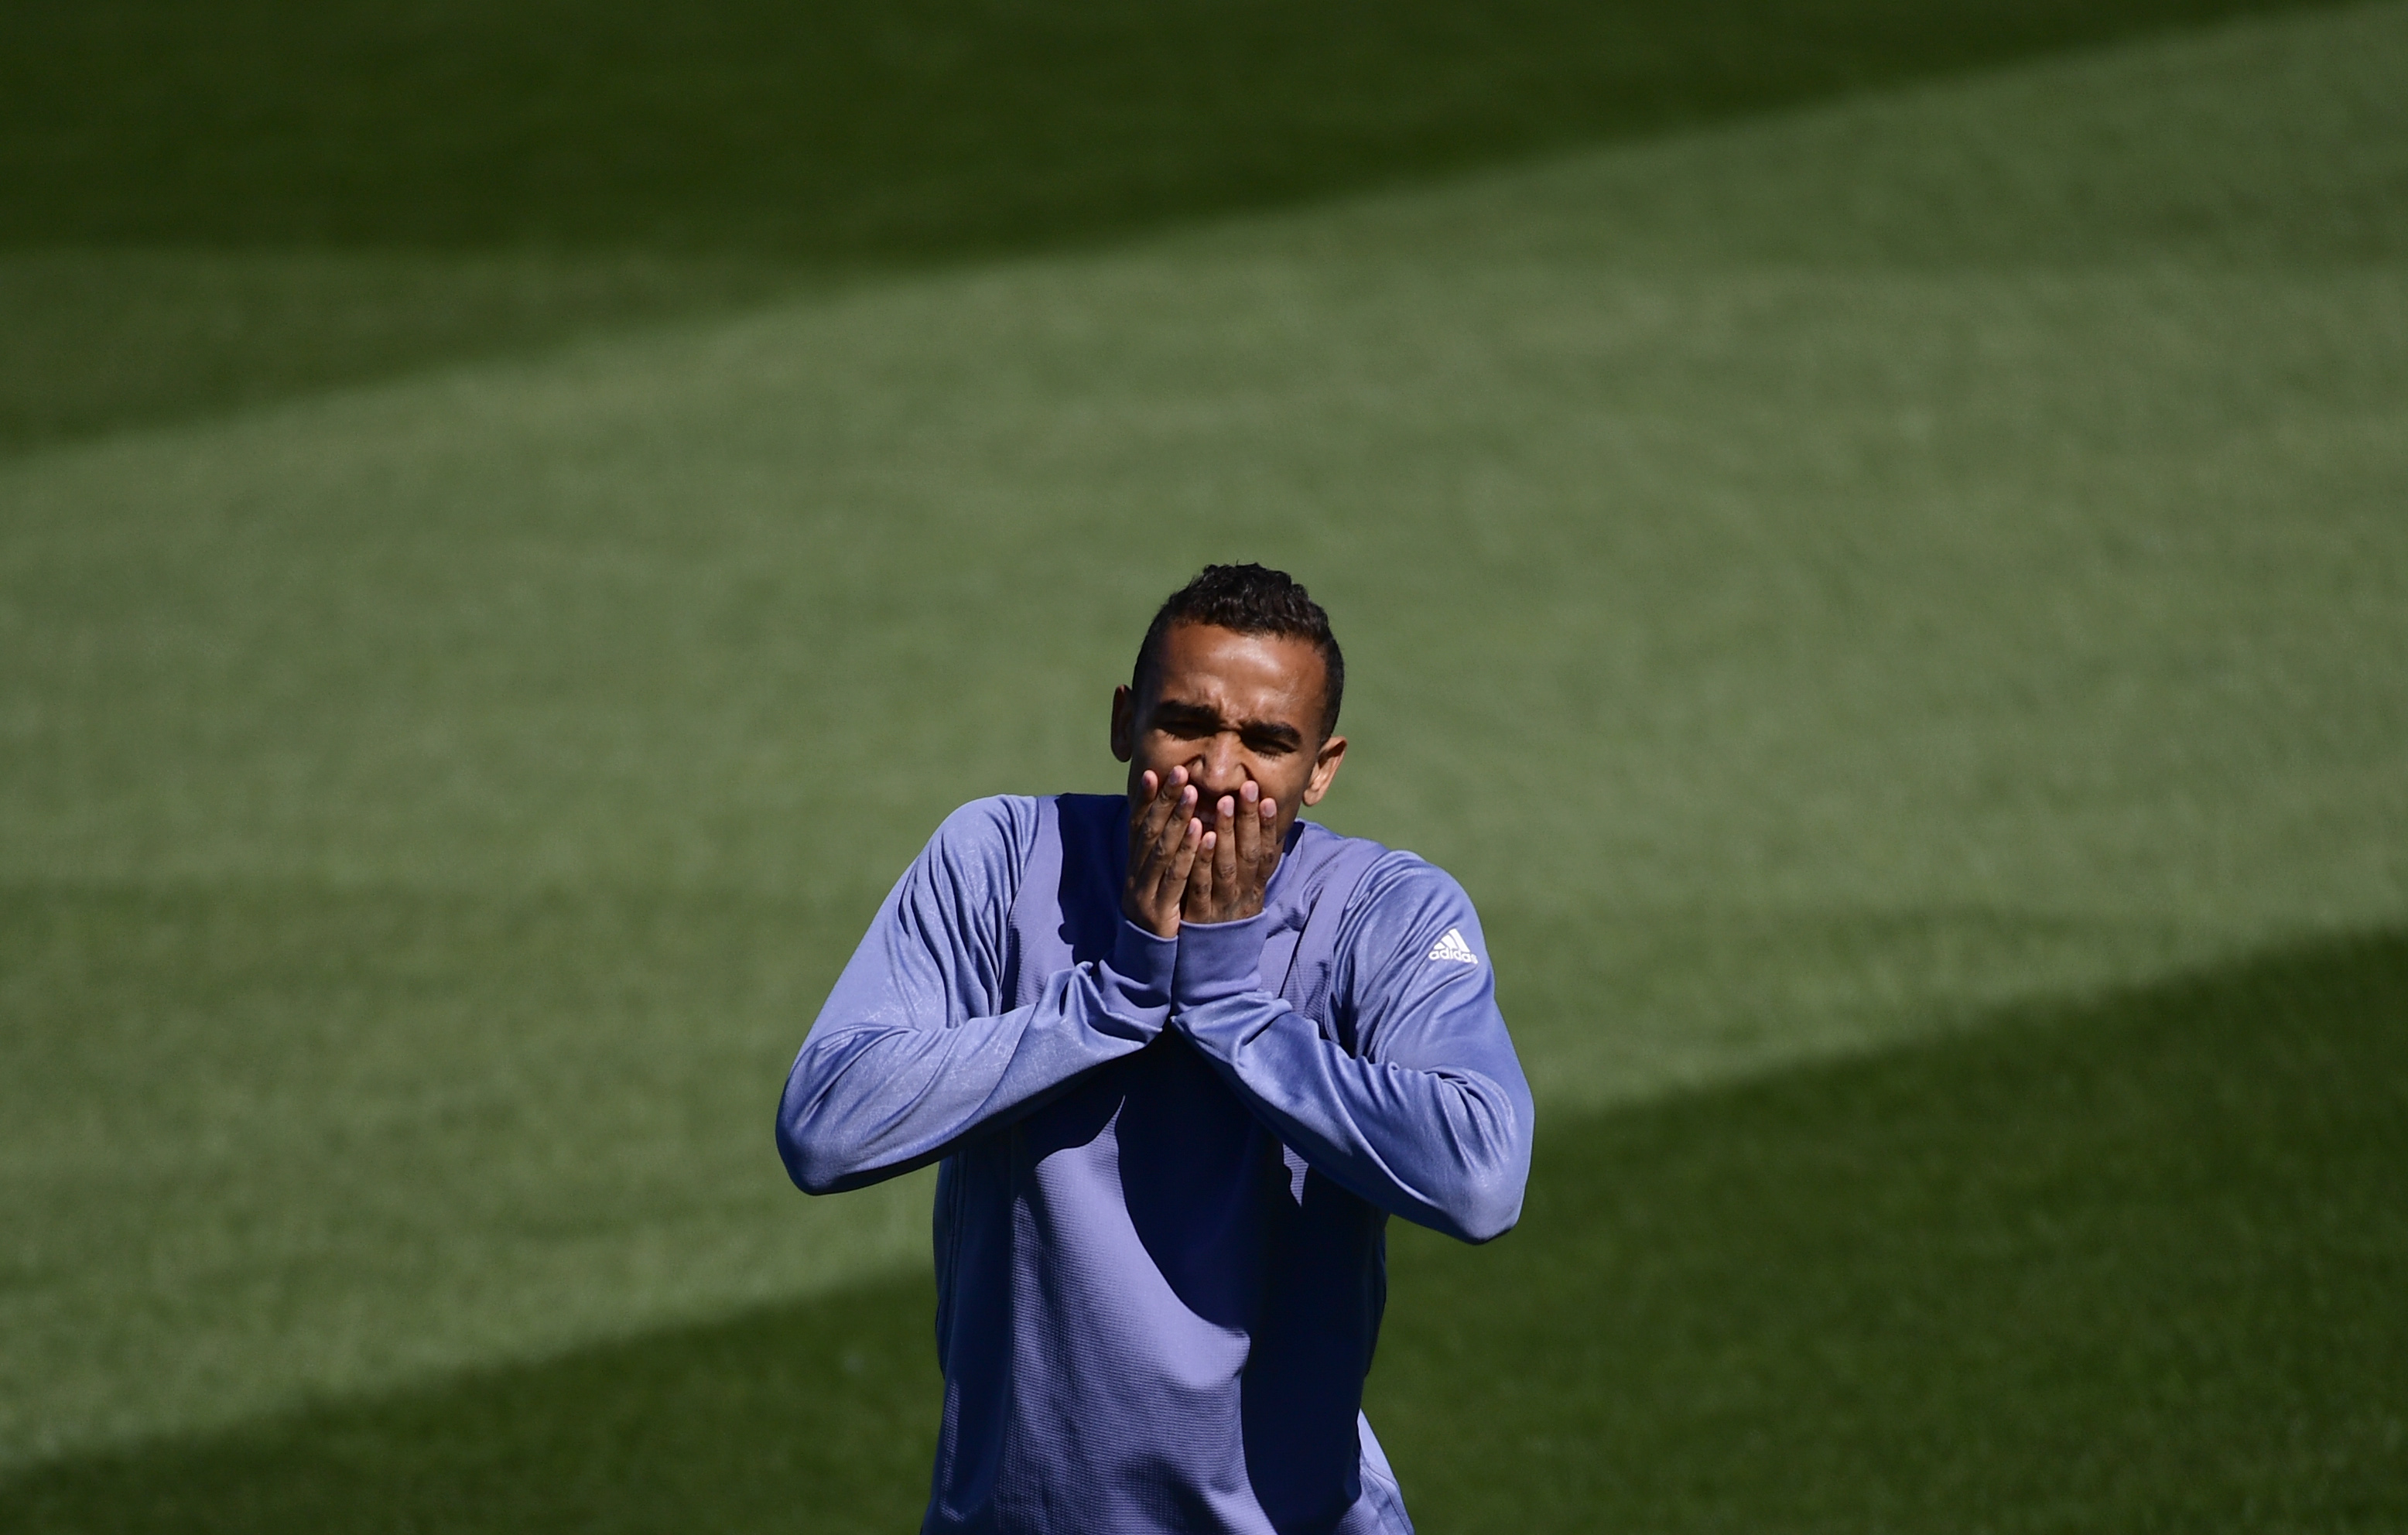 Real Madrid's Brazilian defender Danilo gestures during a training session at Valdebebas Sport City in Madrid on May 1, 2017 on the eve of their Champions' League semi-final first leg football match against Atletico de Madrid. / AFP PHOTO / PIERRE-PHILIPPE MARCOU        (Photo credit should read PIERRE-PHILIPPE MARCOU/AFP/Getty Images)